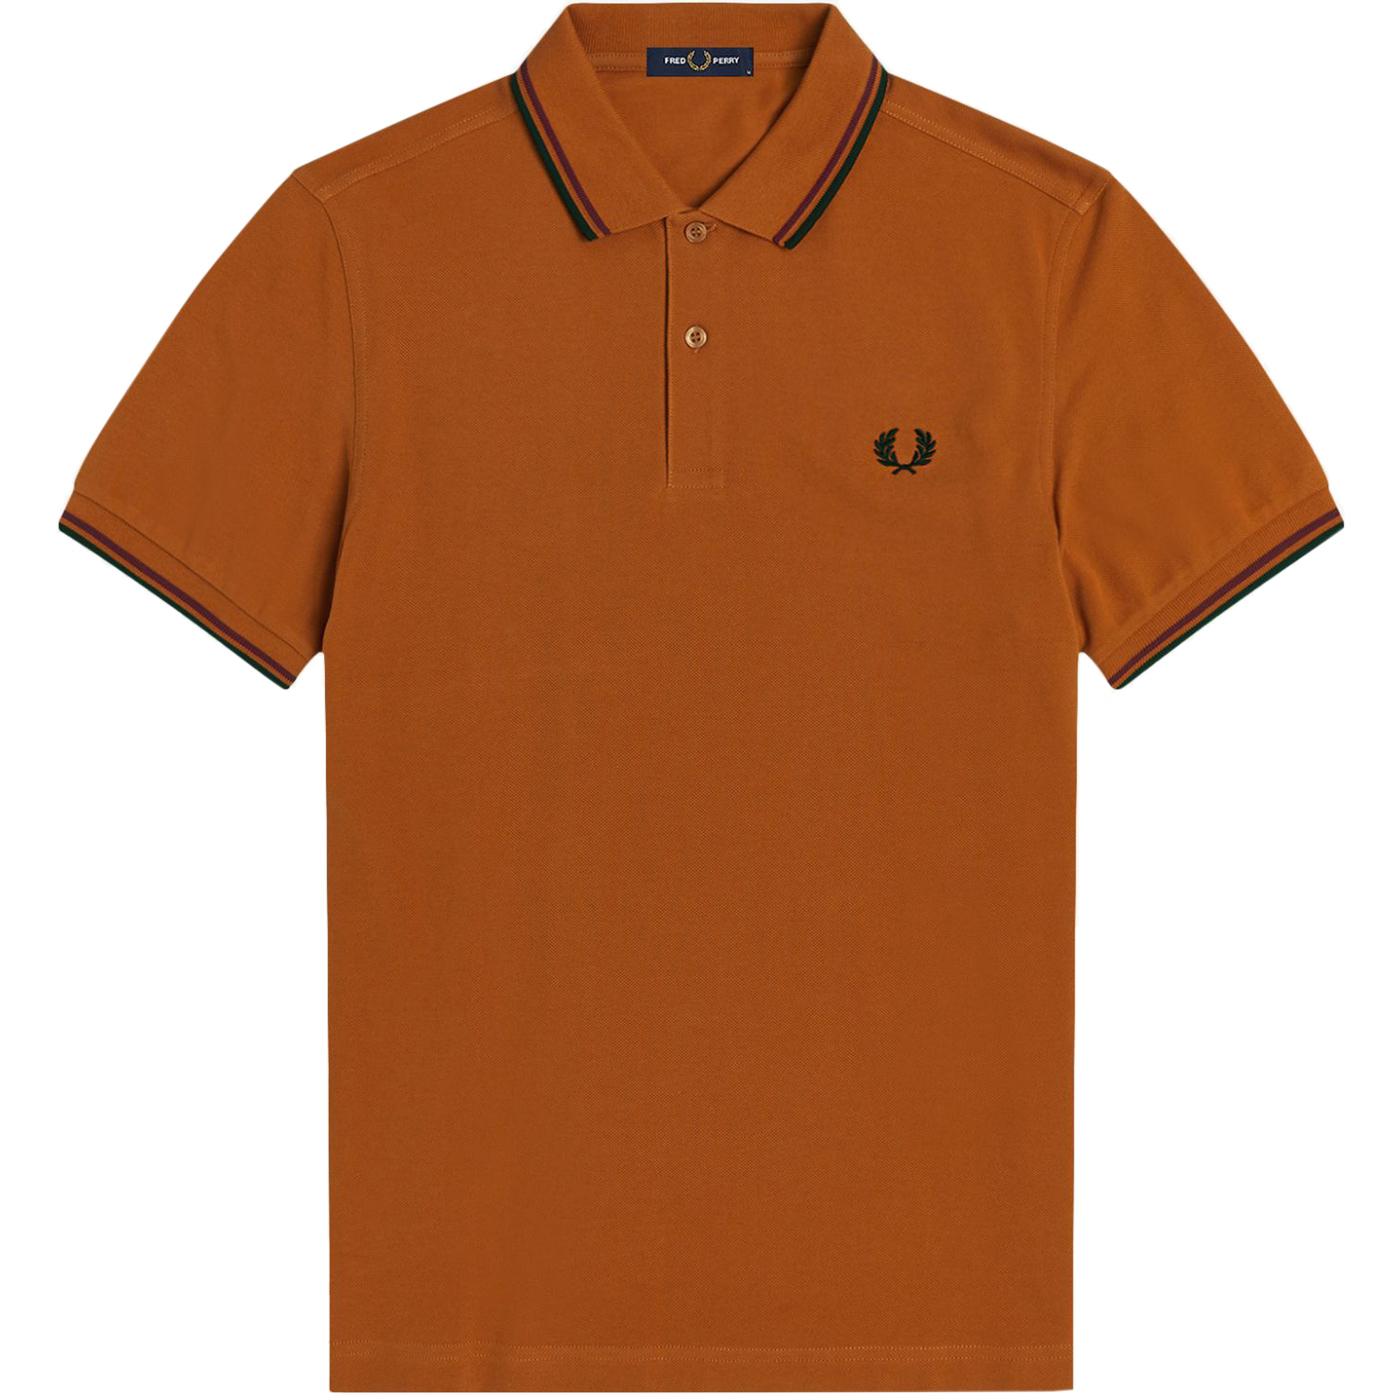 FRED PERRY M3600 Men's Twin Tipped Pique Polo RUST